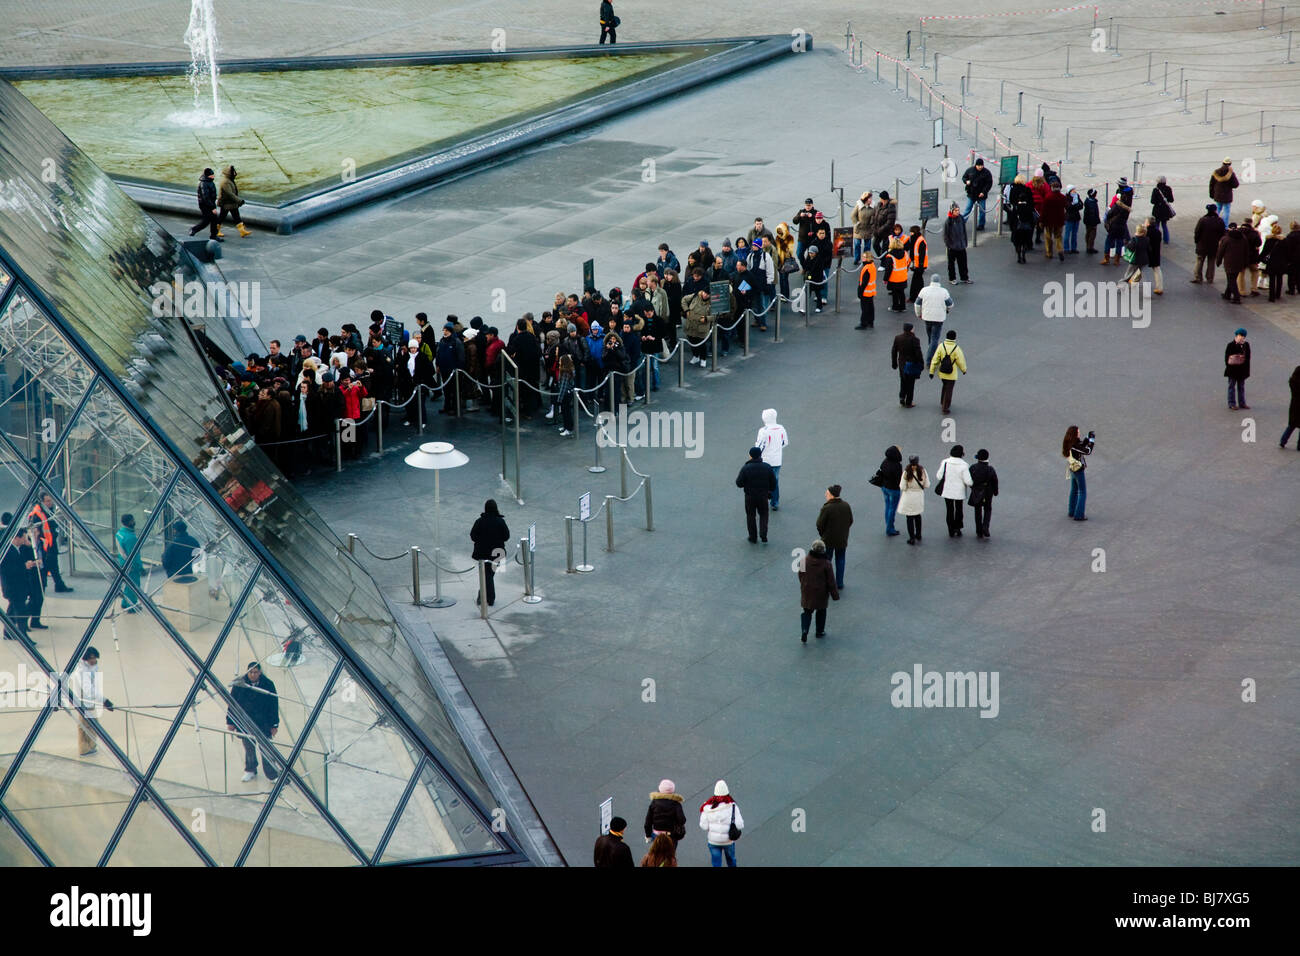 People queue for free entry to The Louvre Museum / Musee / Palais du Louvre, beside the Glass Pyramid. Paris, France. Stock Photo